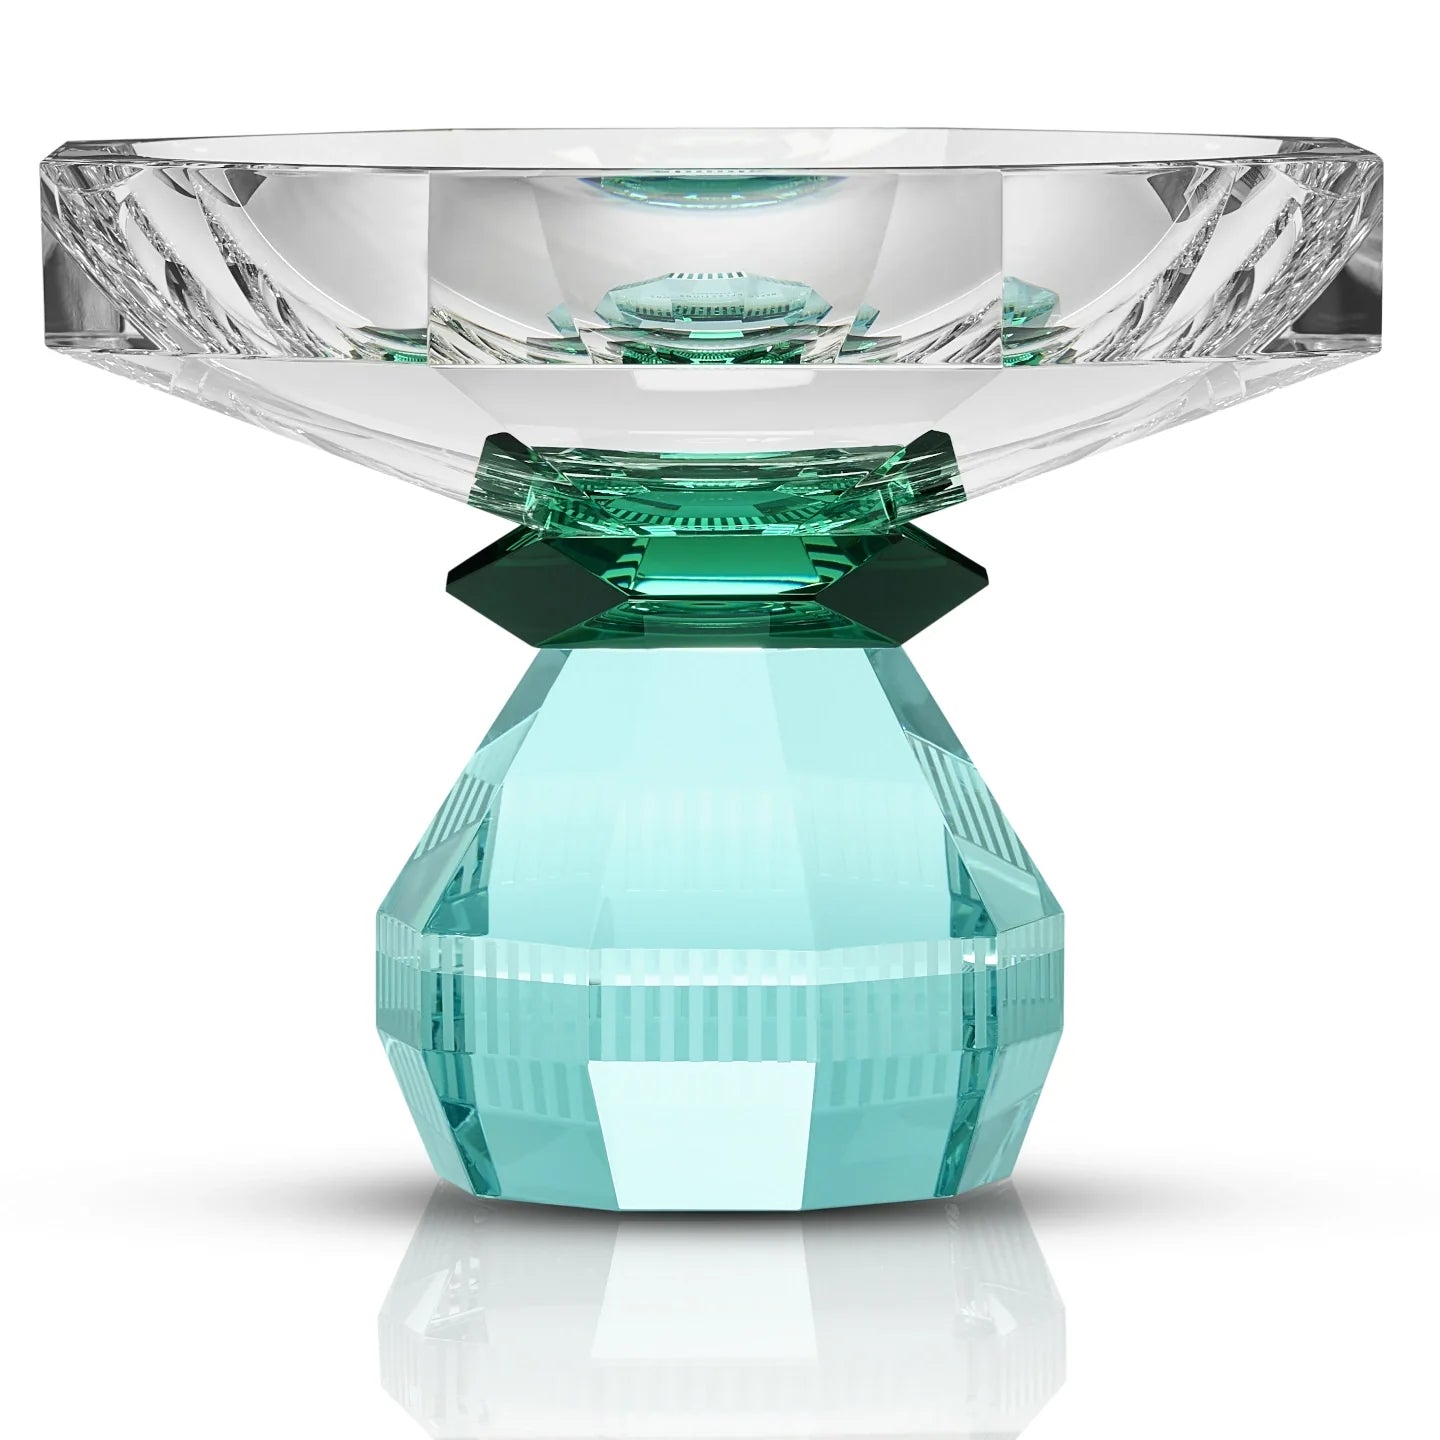 Reflections - Objects: Madison Bowl Azure/ Clear/ Green